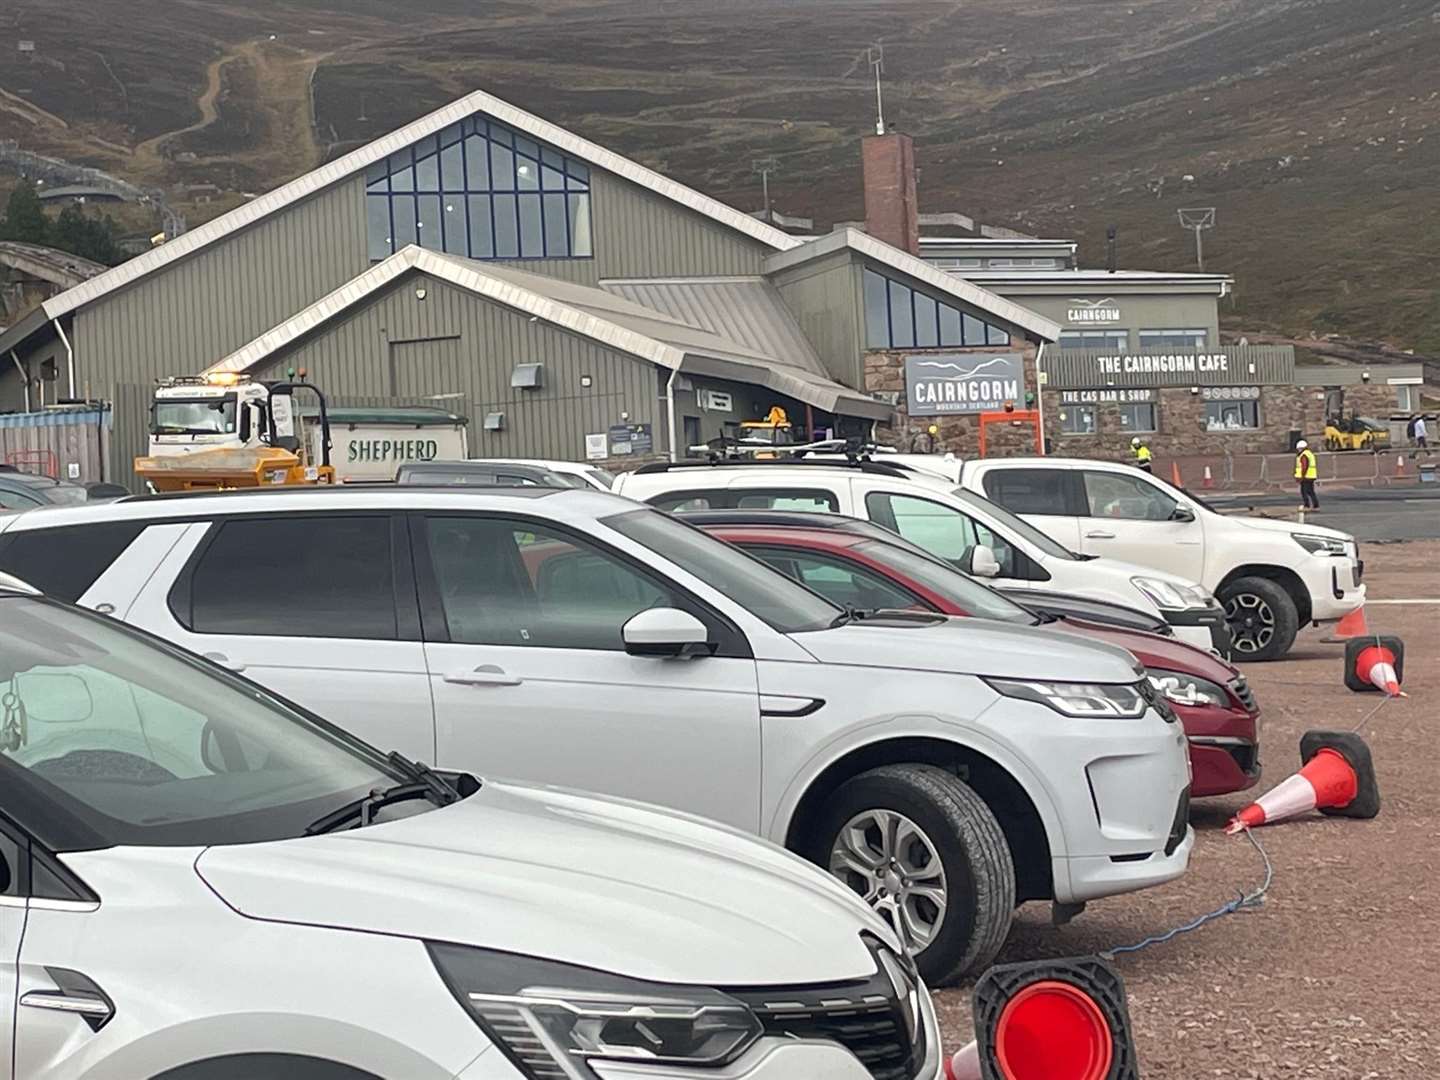 The Day Lodge is due to be replaced at Cairngorm Mountain in the next five years by a new mountain centre.